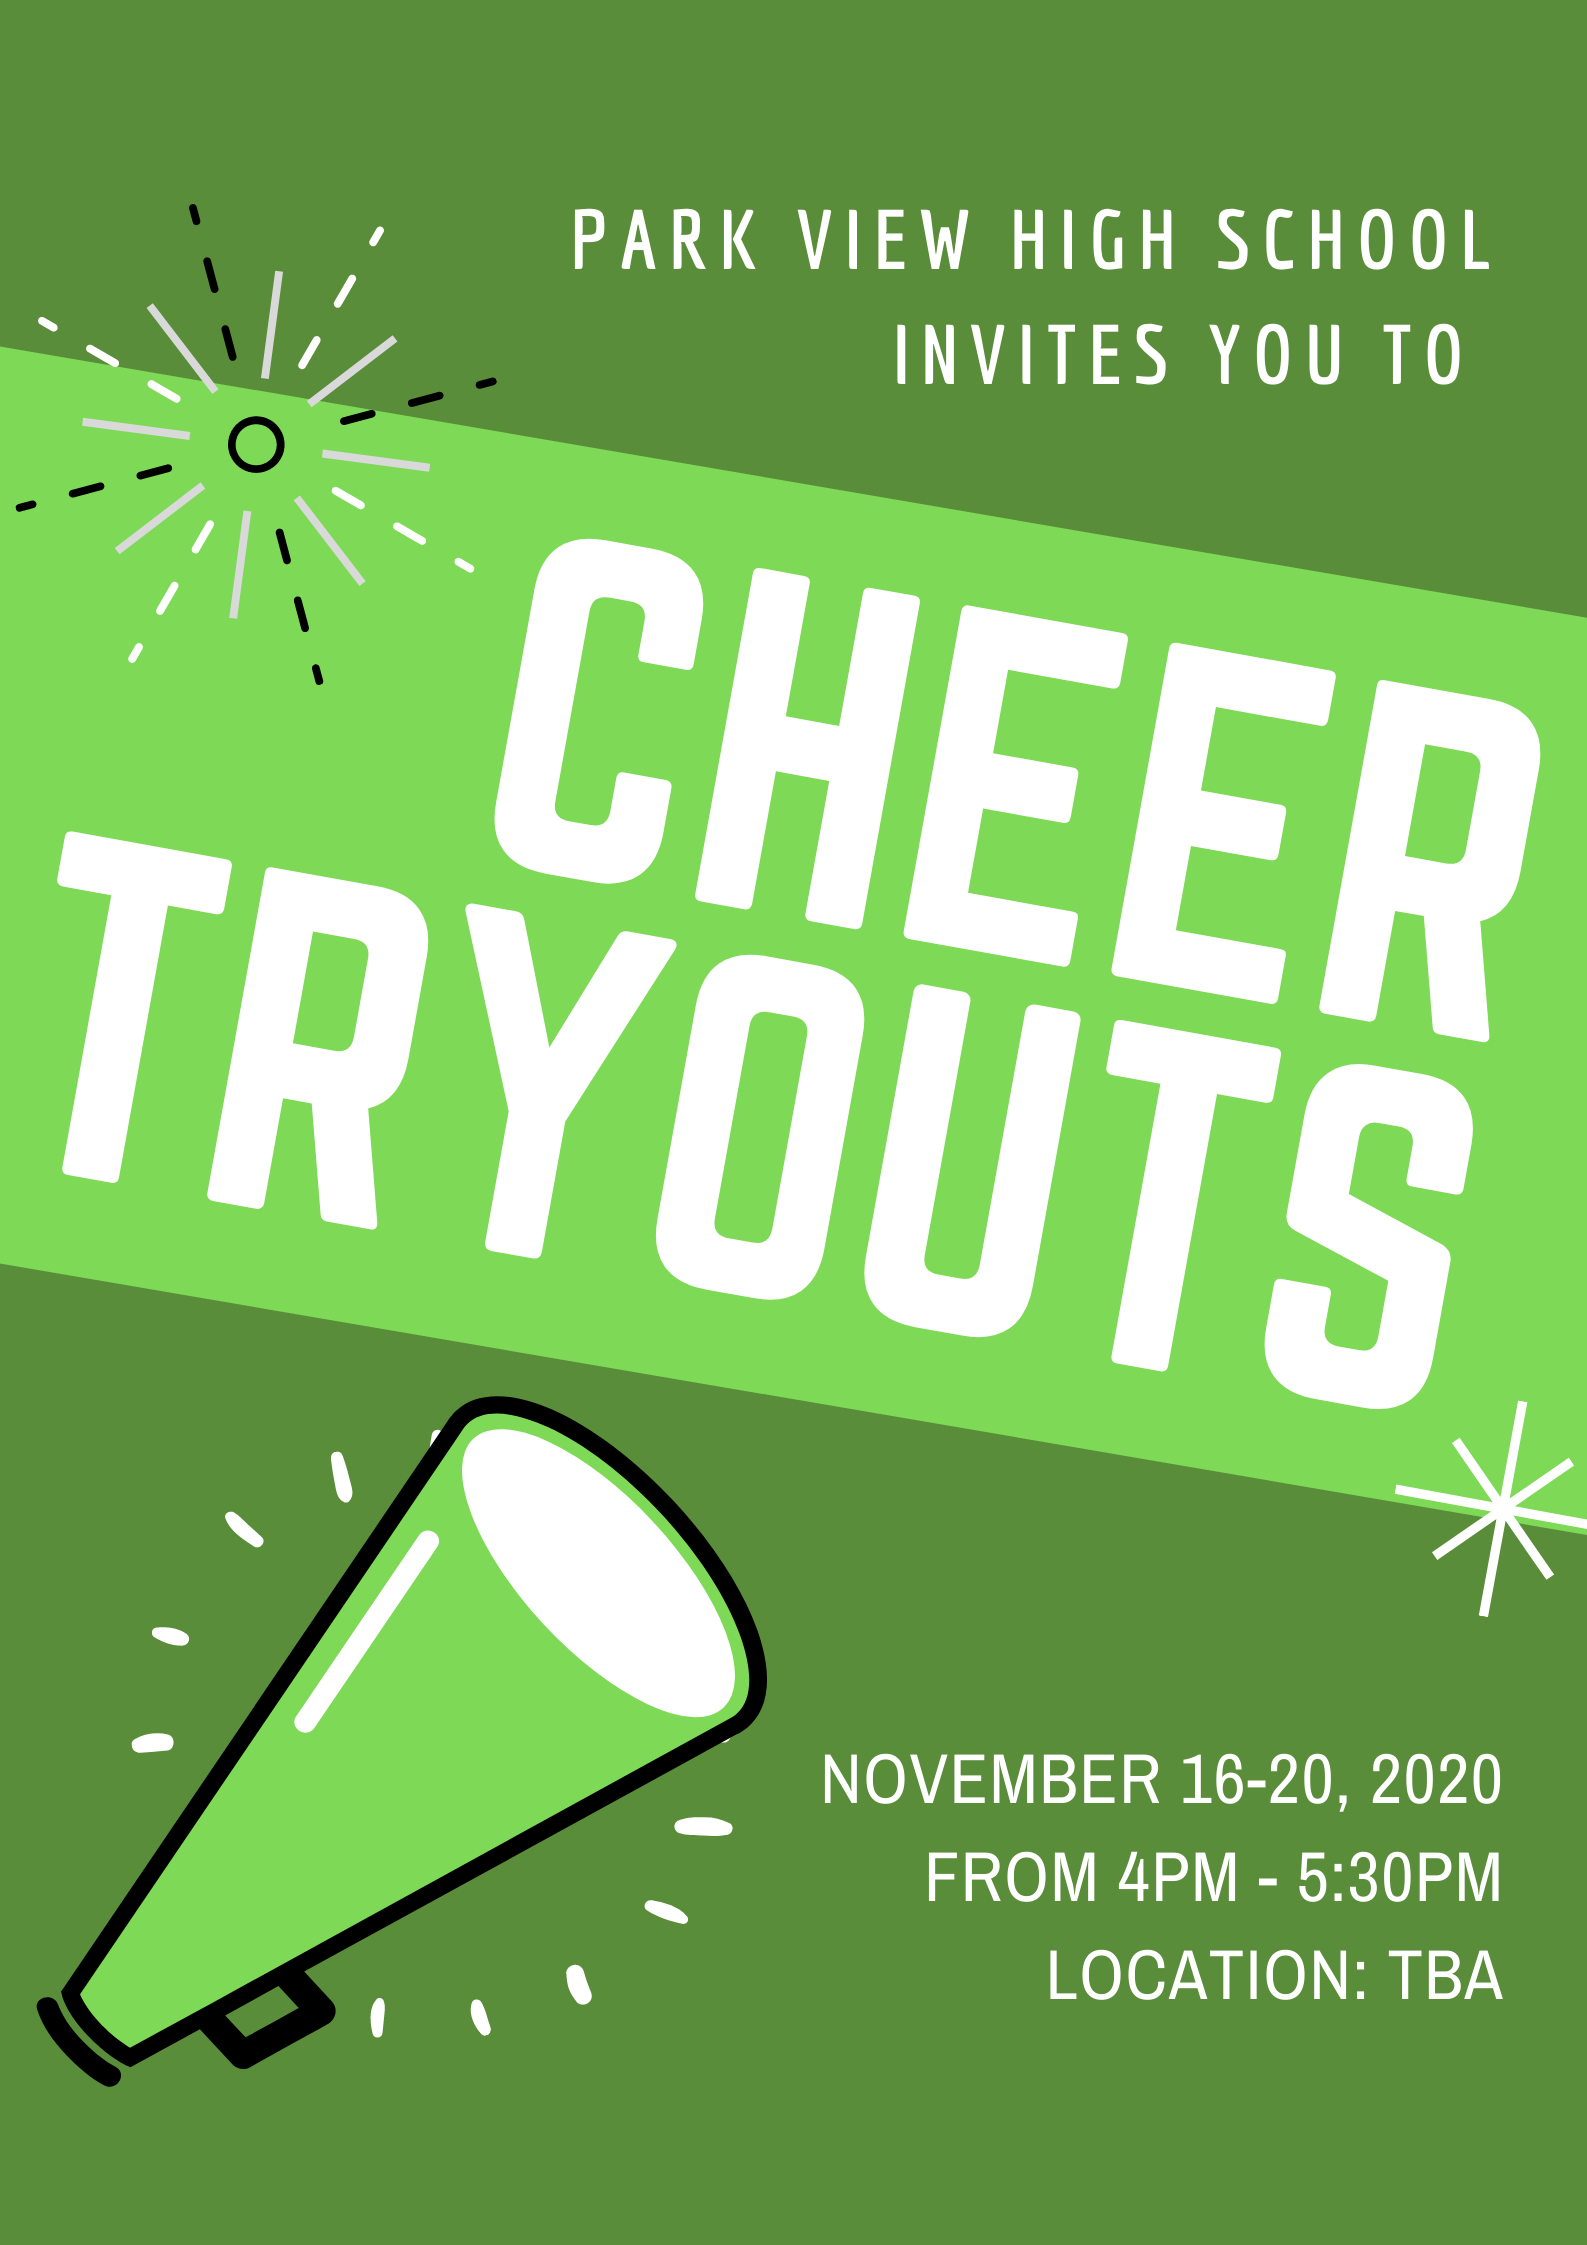 Dragon Cheer Tryouts